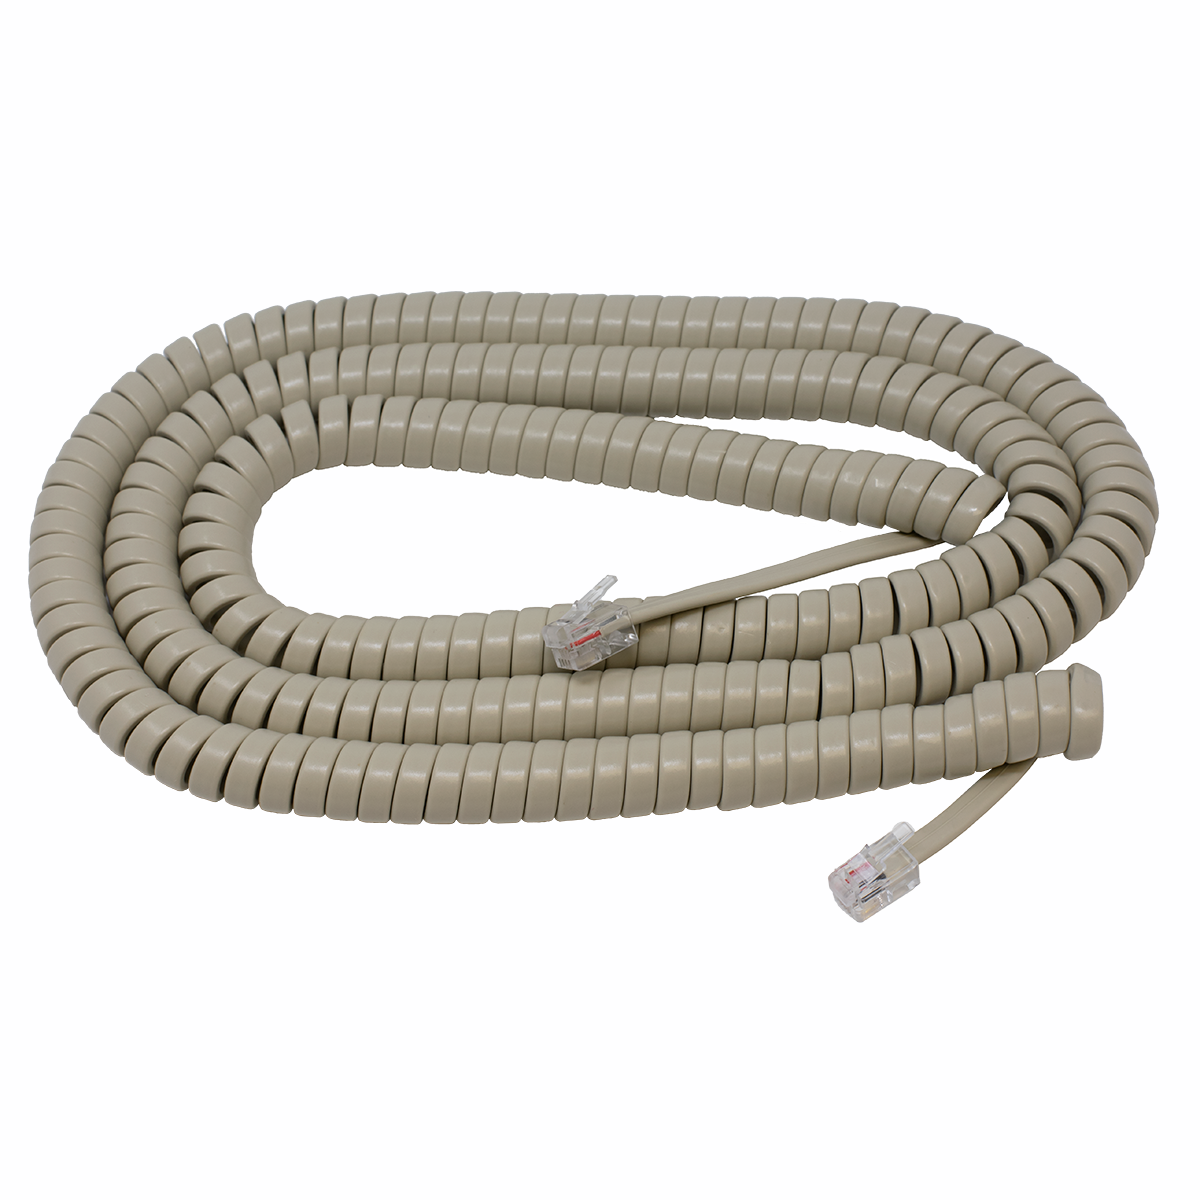 25' Ash Coiled Handset Cord